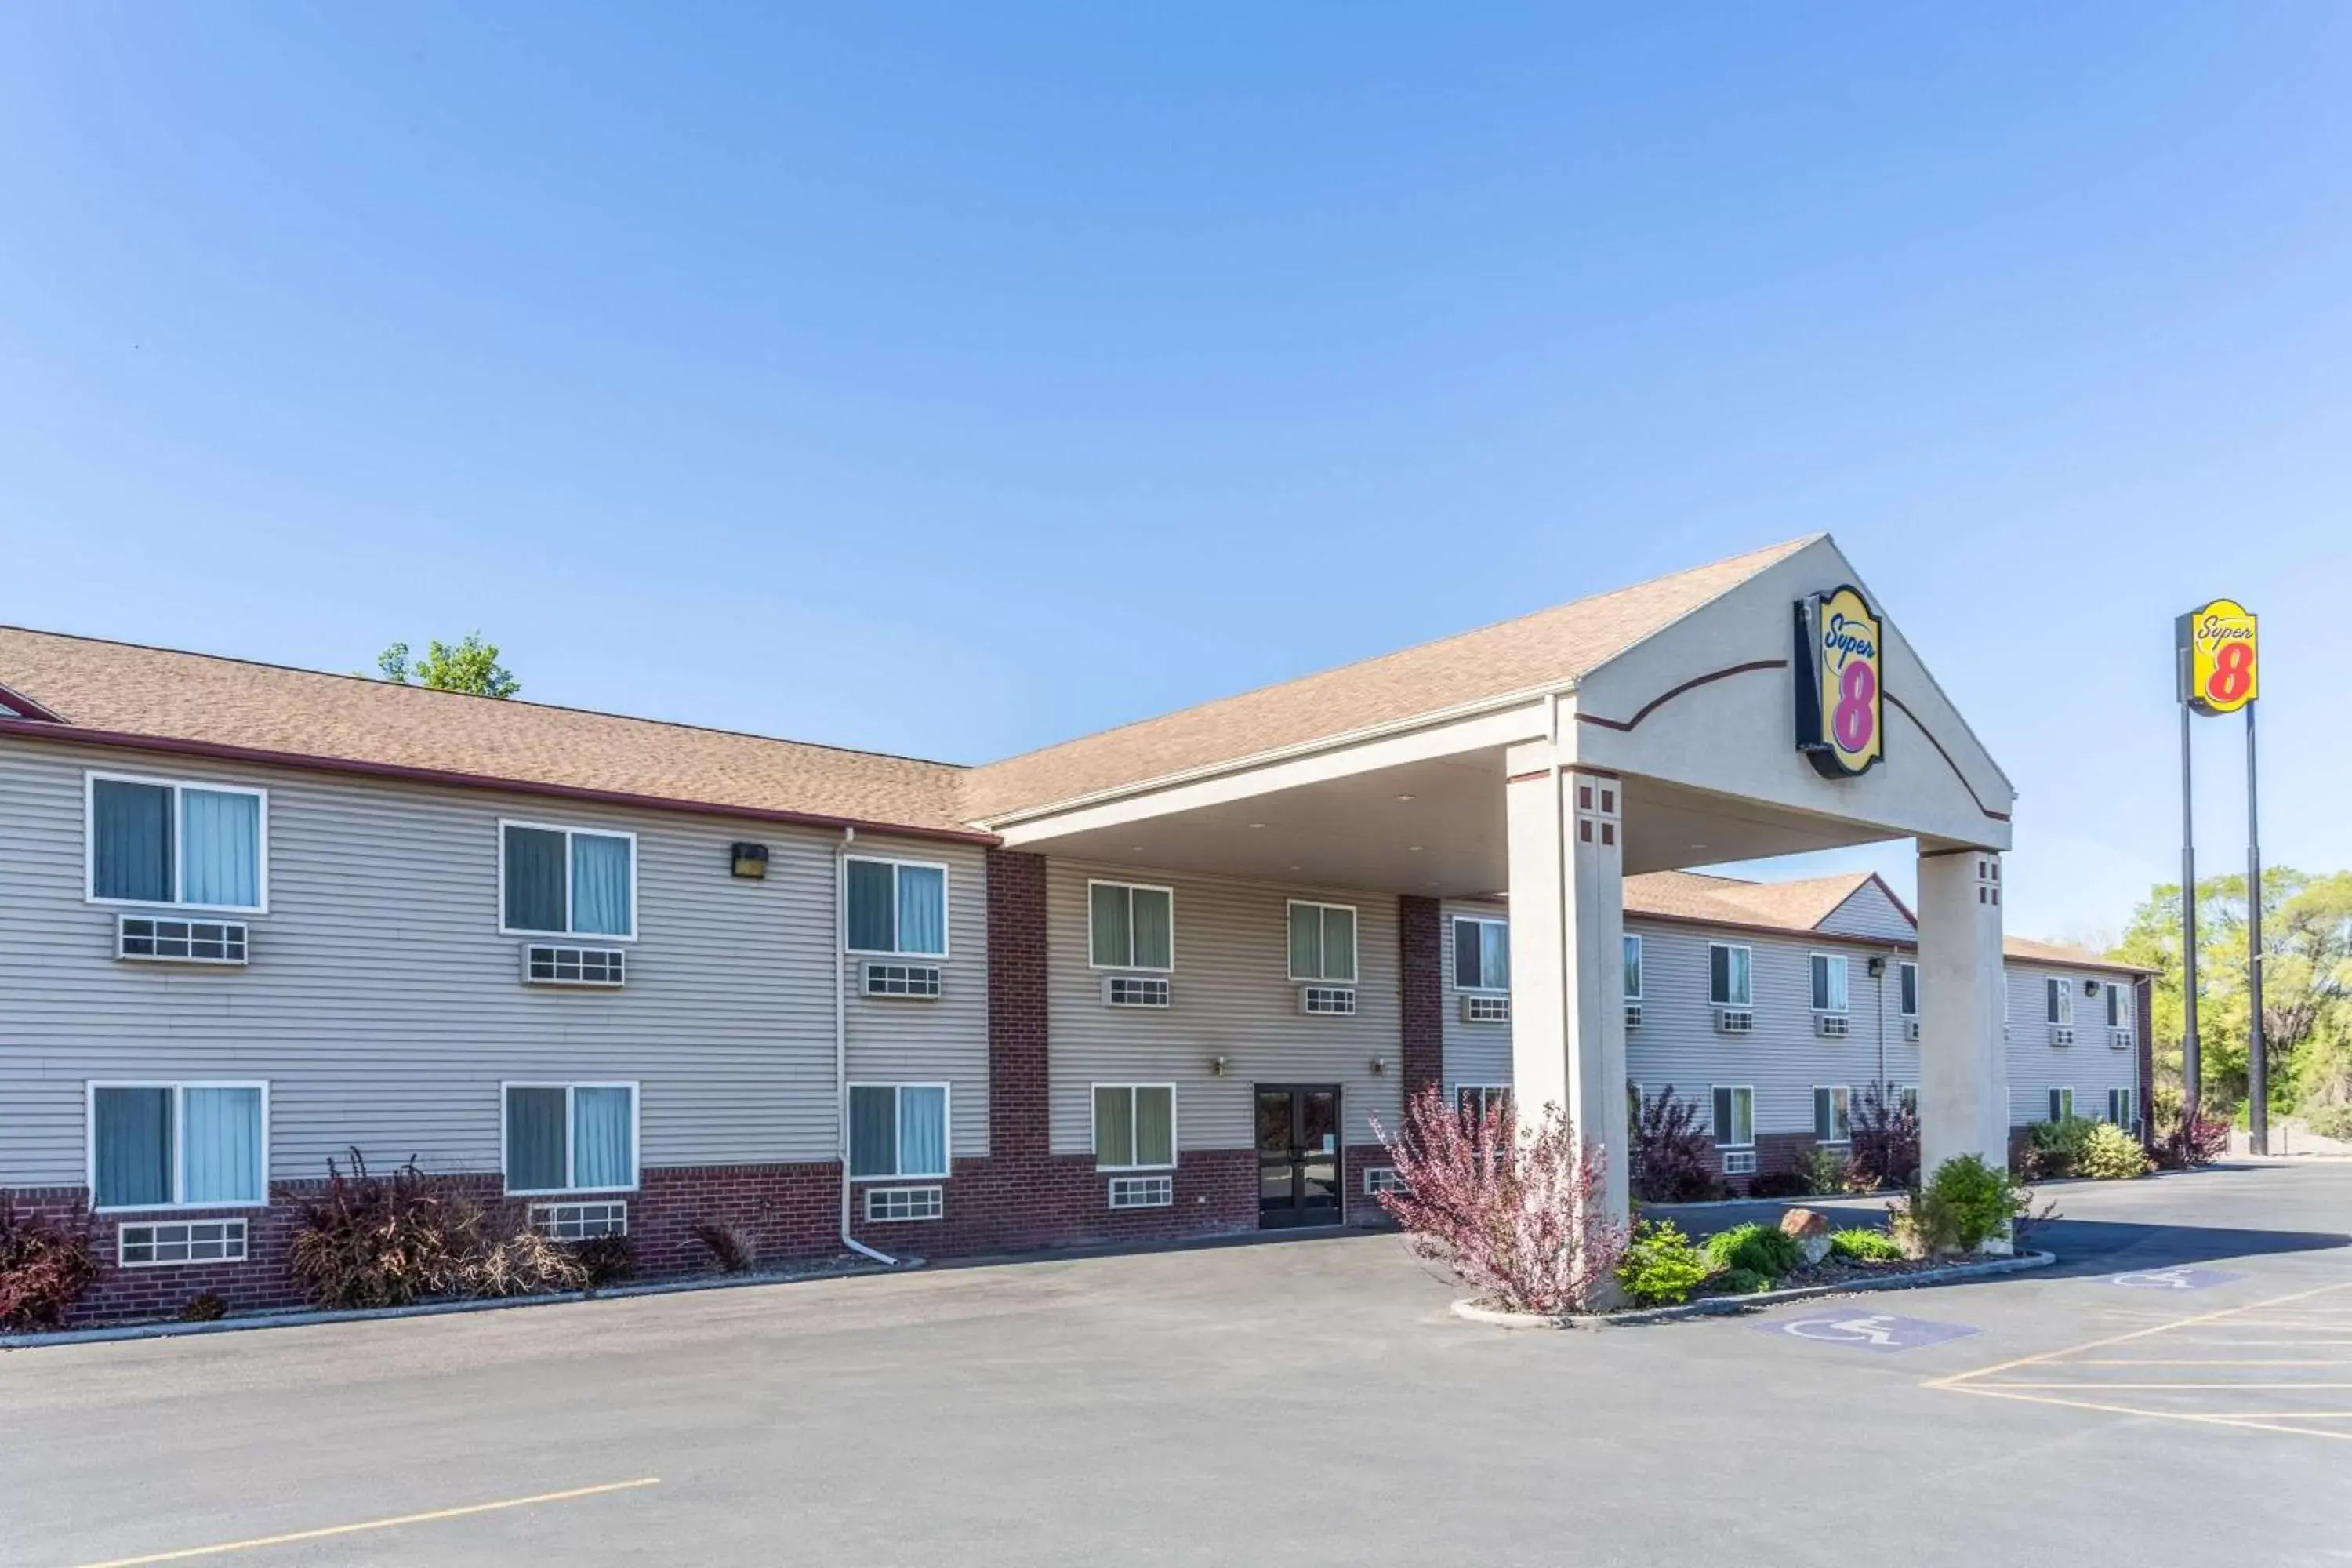 Property Building in Super 8 by Wyndham Super 8 Blackfoot